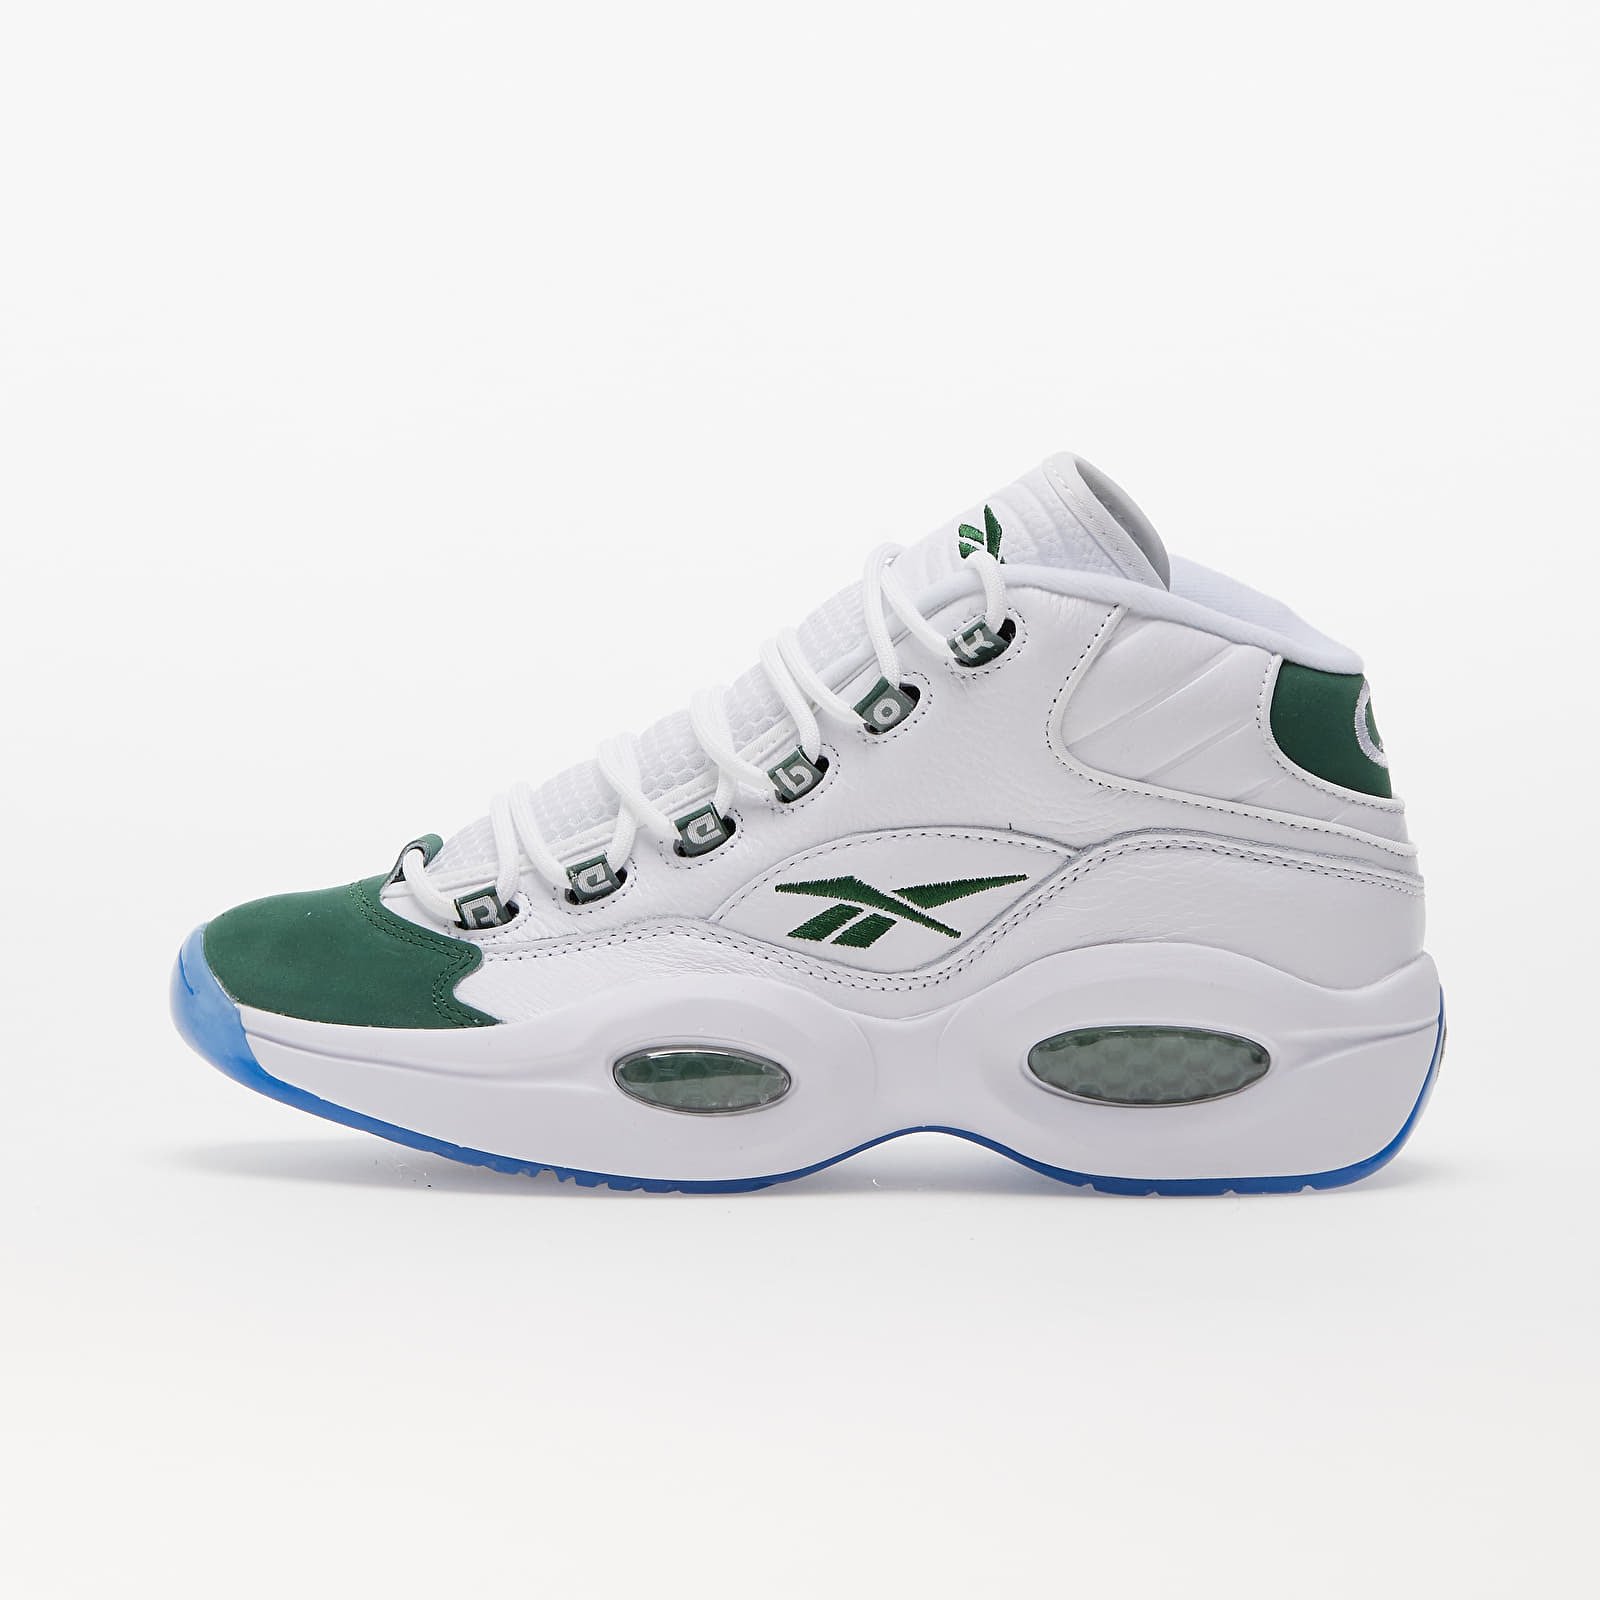 Reebok - question mid ftw white/ pine green/ ftw white